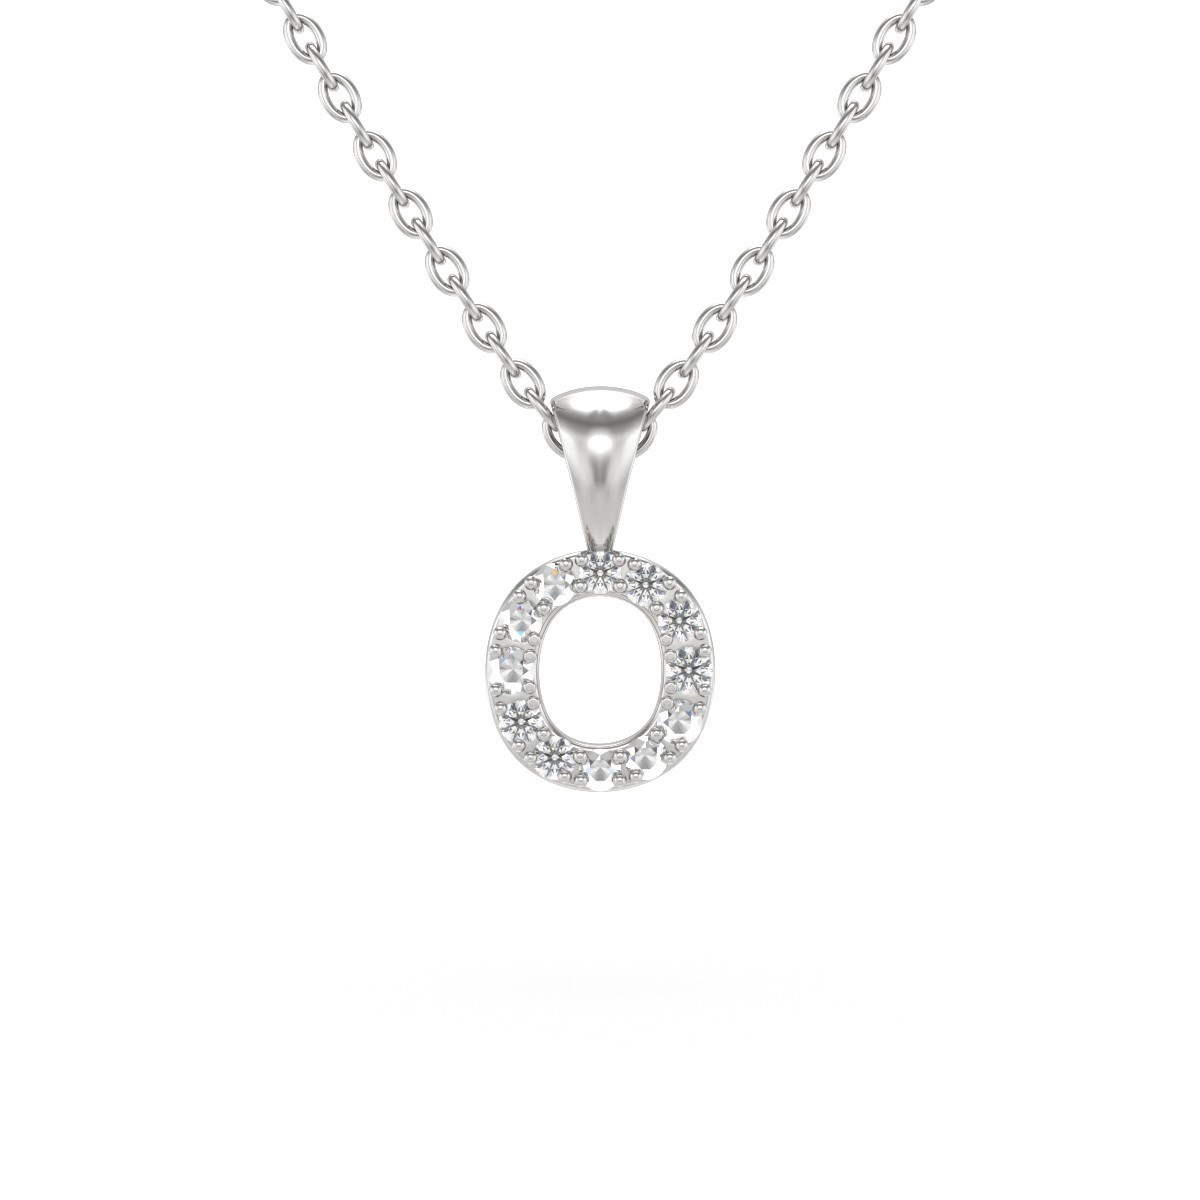 Collier Pendentif ADEN Lettre O Or 750 Blanc Diamant Chaine Or 750 incluse 0.72grs